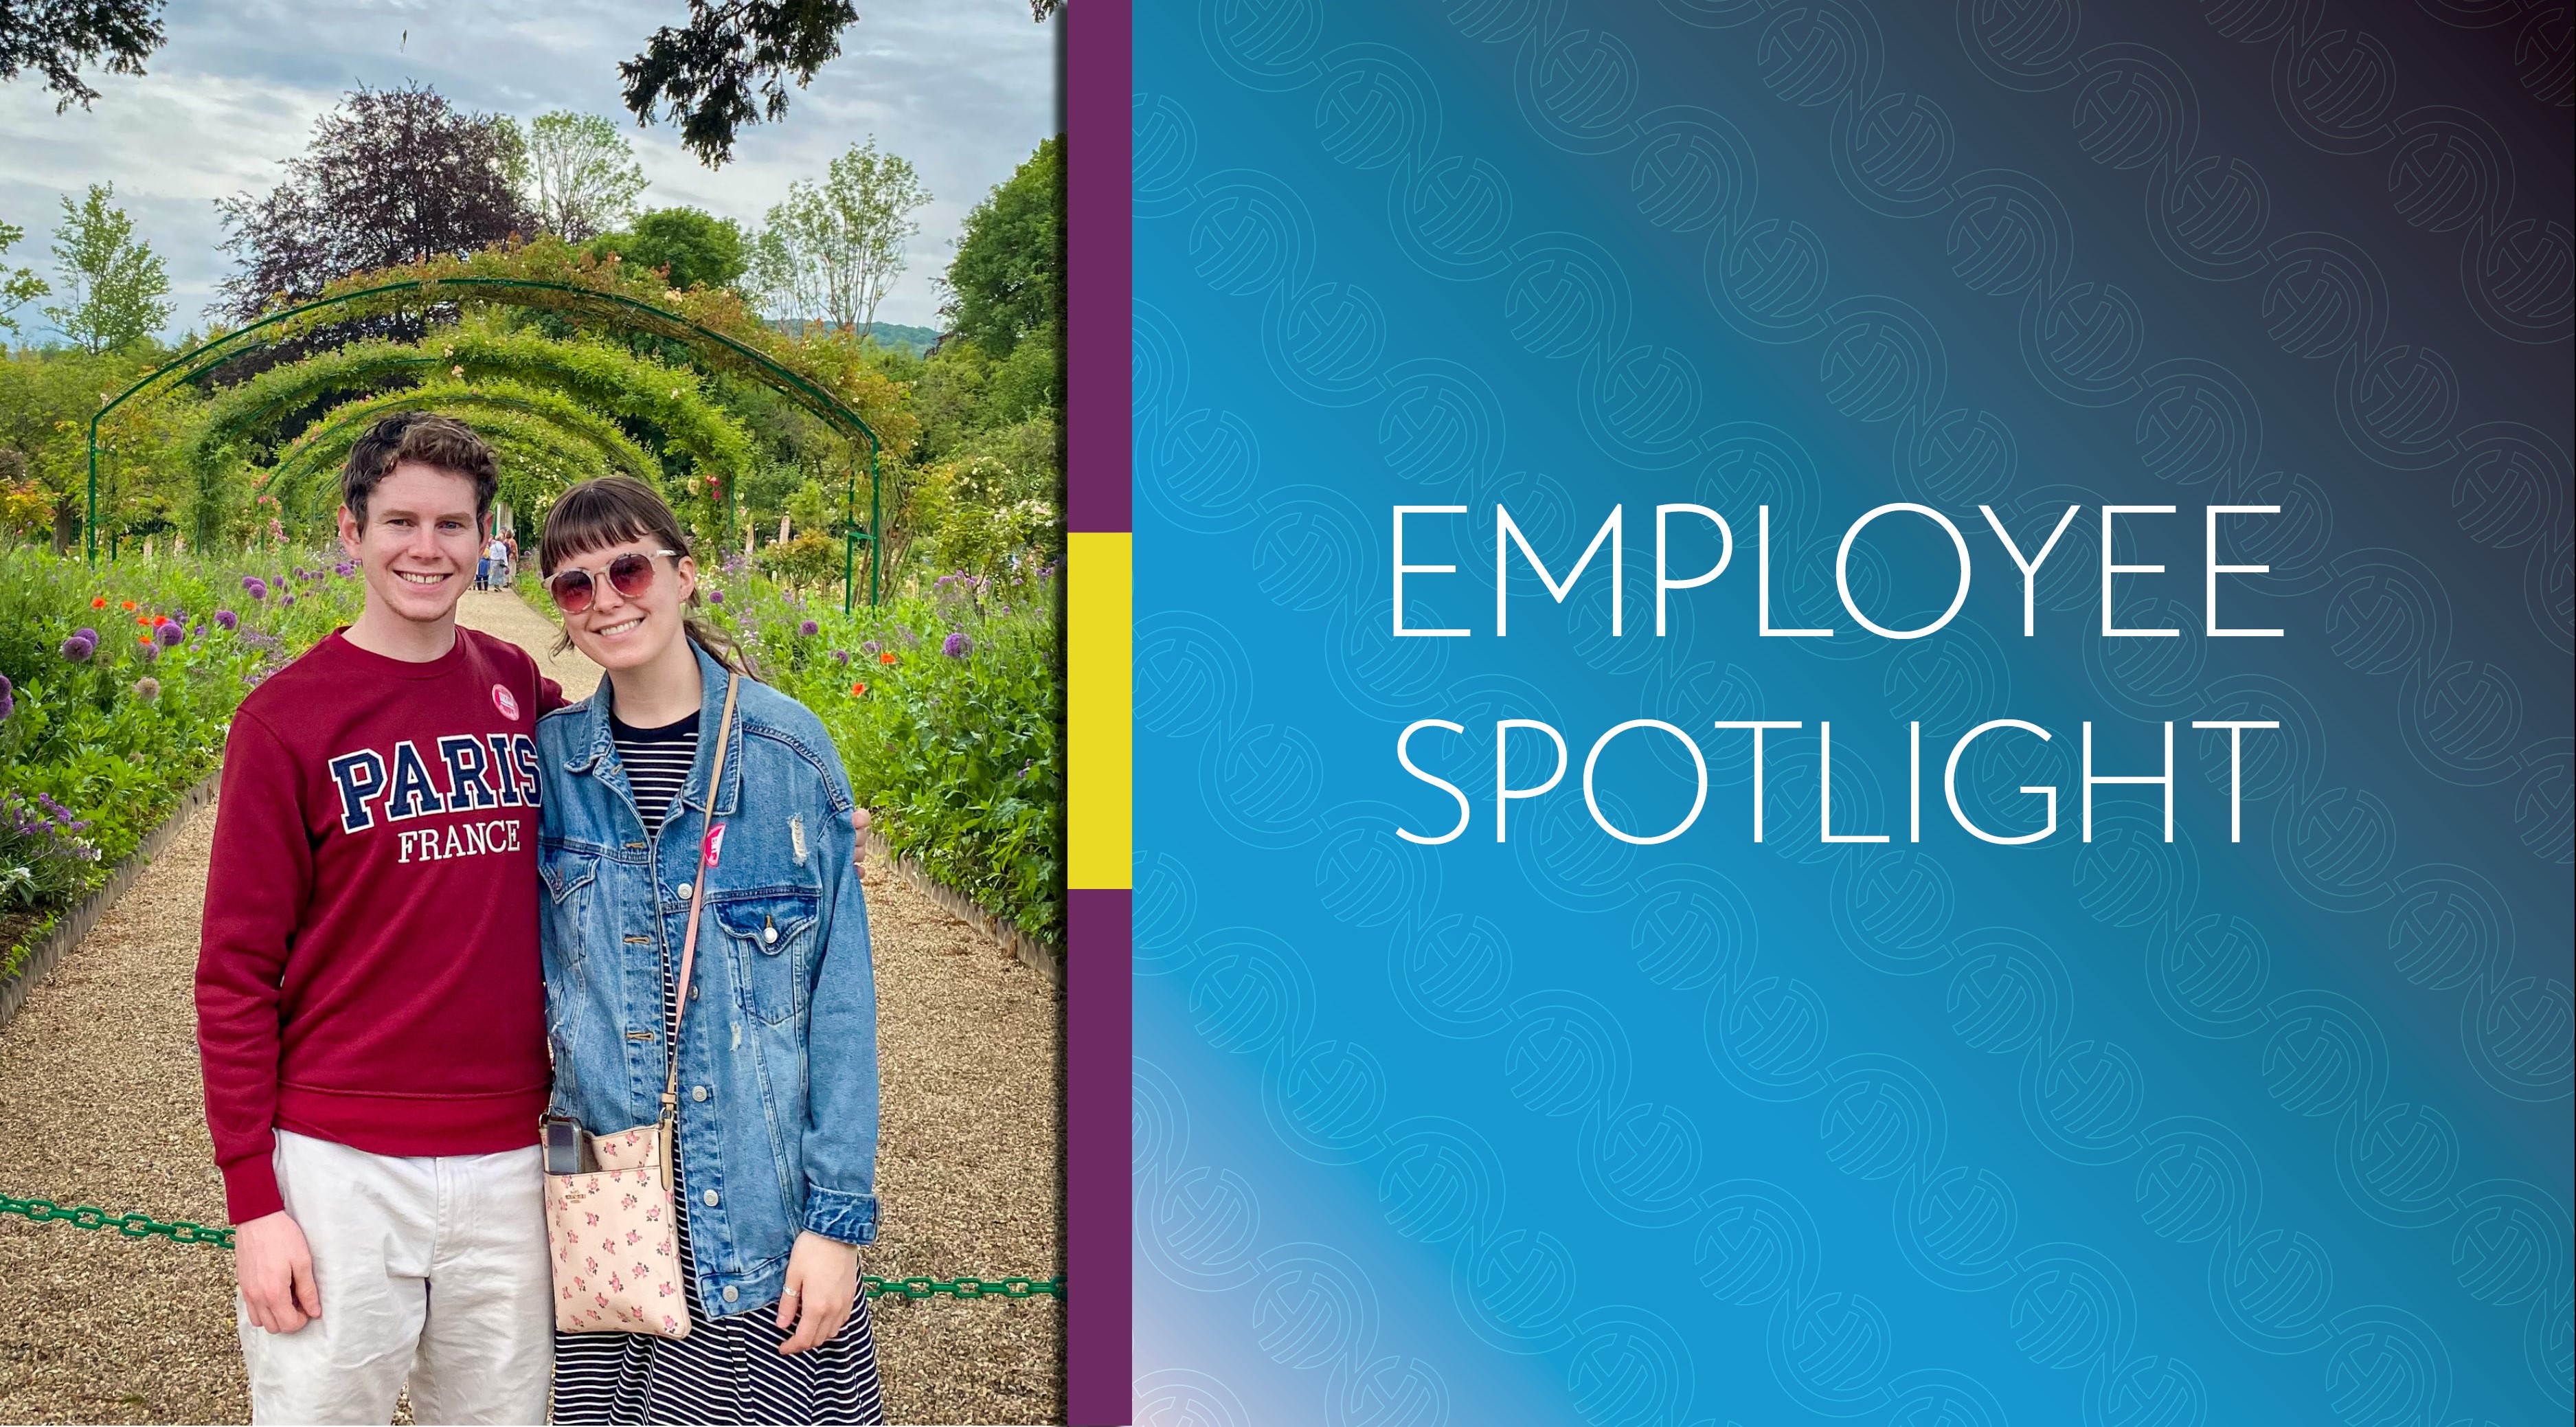 This month's Meet our Team Monday / Employee Spotlight is JJ Hollstein from our Ground Transportation Division!